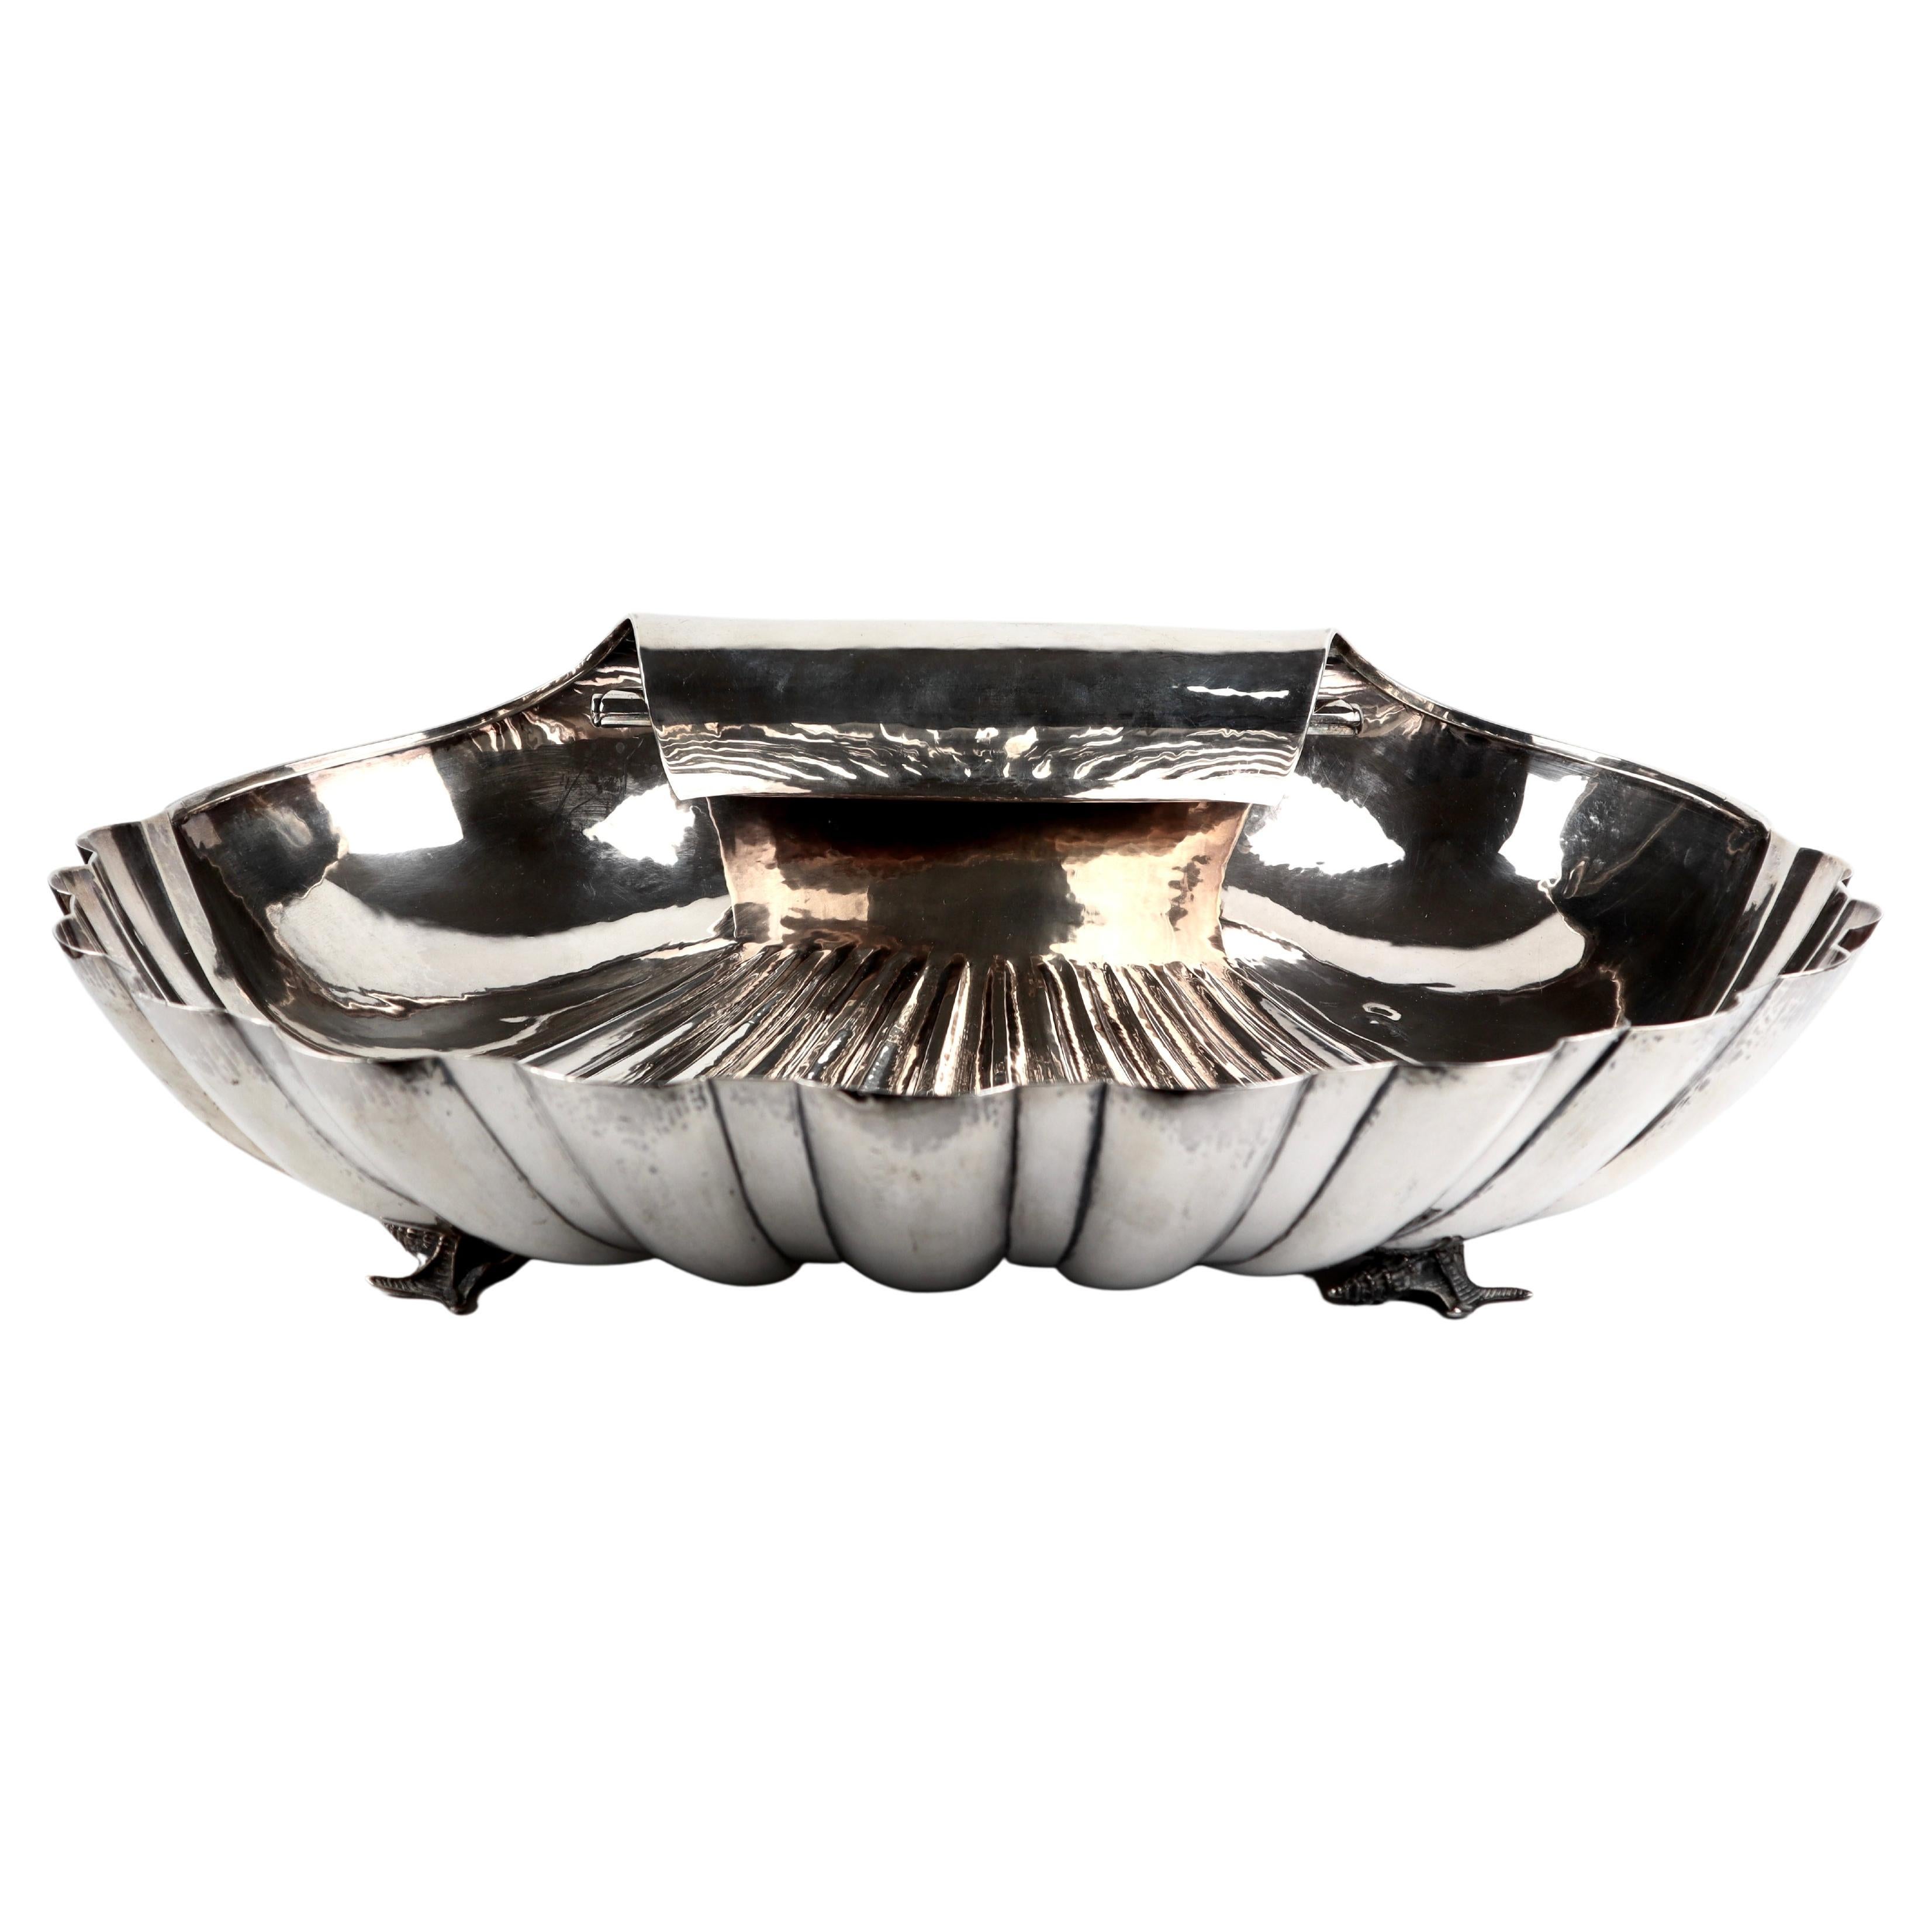 A magnificent sterling silver Scallop Shell centrepiece on a grand scale, deep fluted scalloped rim and a furled handle. the shells body rests on 4 crafted shell supports.
Hallmarked Buccellati Italy Sterling
Date Circa 1934-44
Weight 3904